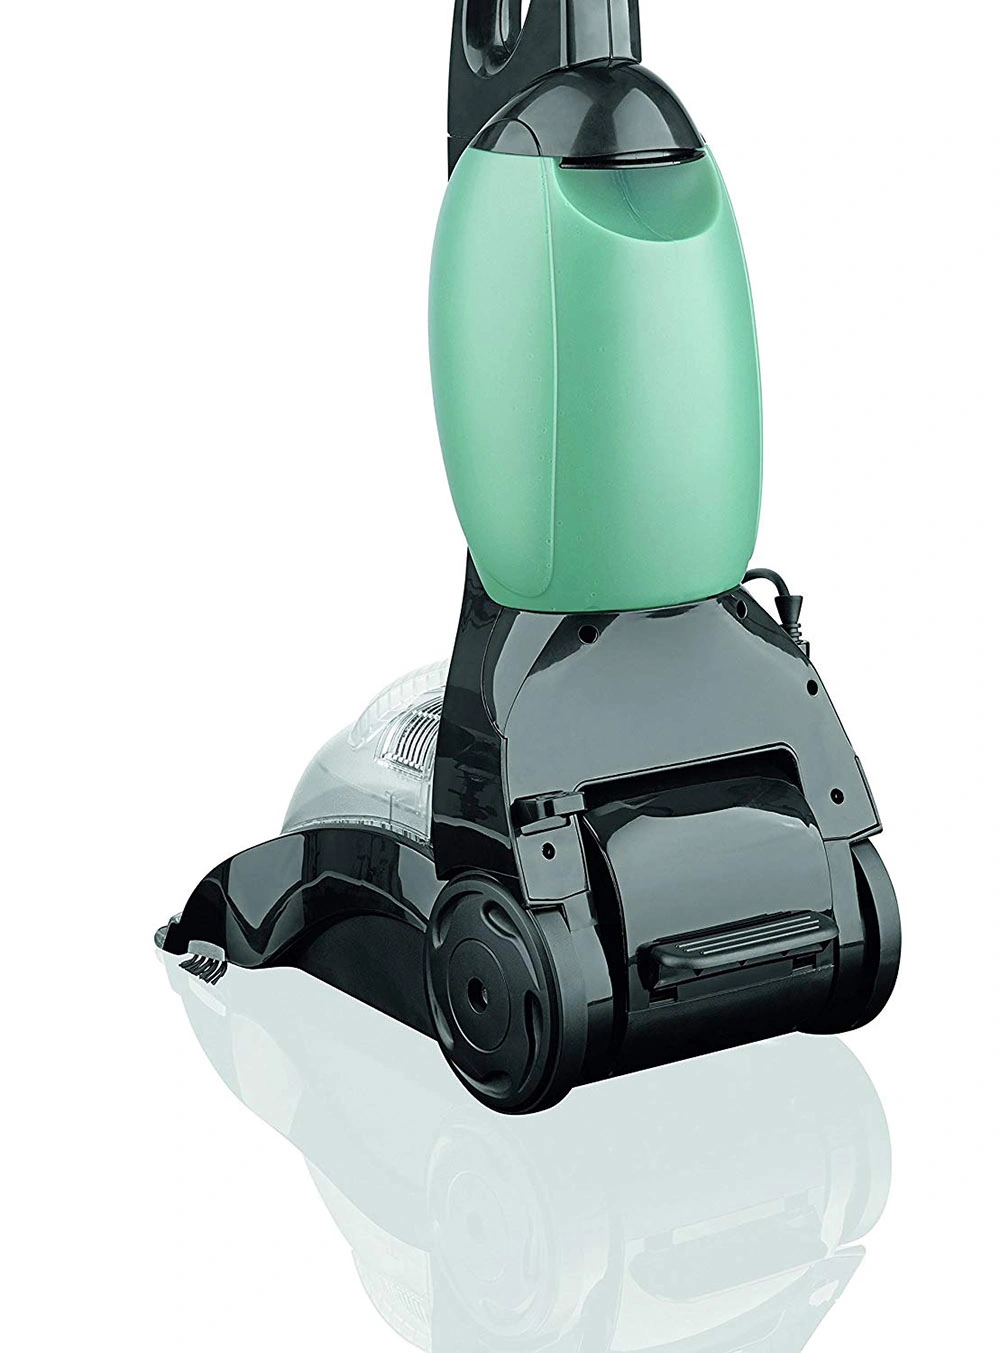 Ly9387 Ultra Suction High Power Upright Carpet Washer Vacuum Cleaner with Two Big Tank